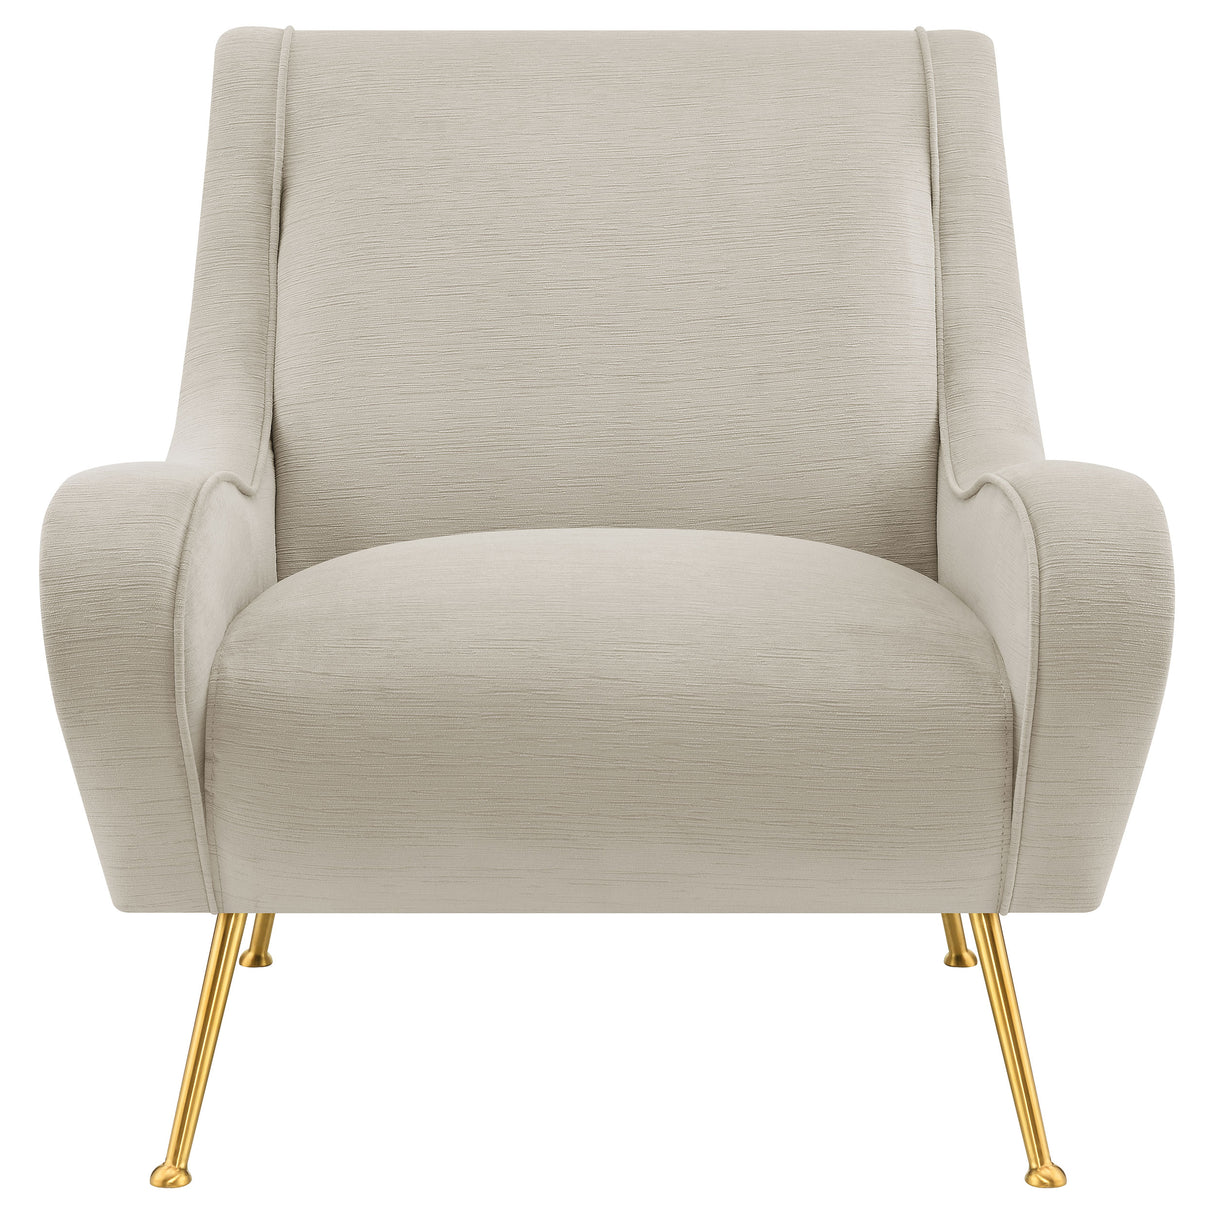 Accent Chair - Ricci Upholstered Saddle Arms Accent Chair Stone and Gold